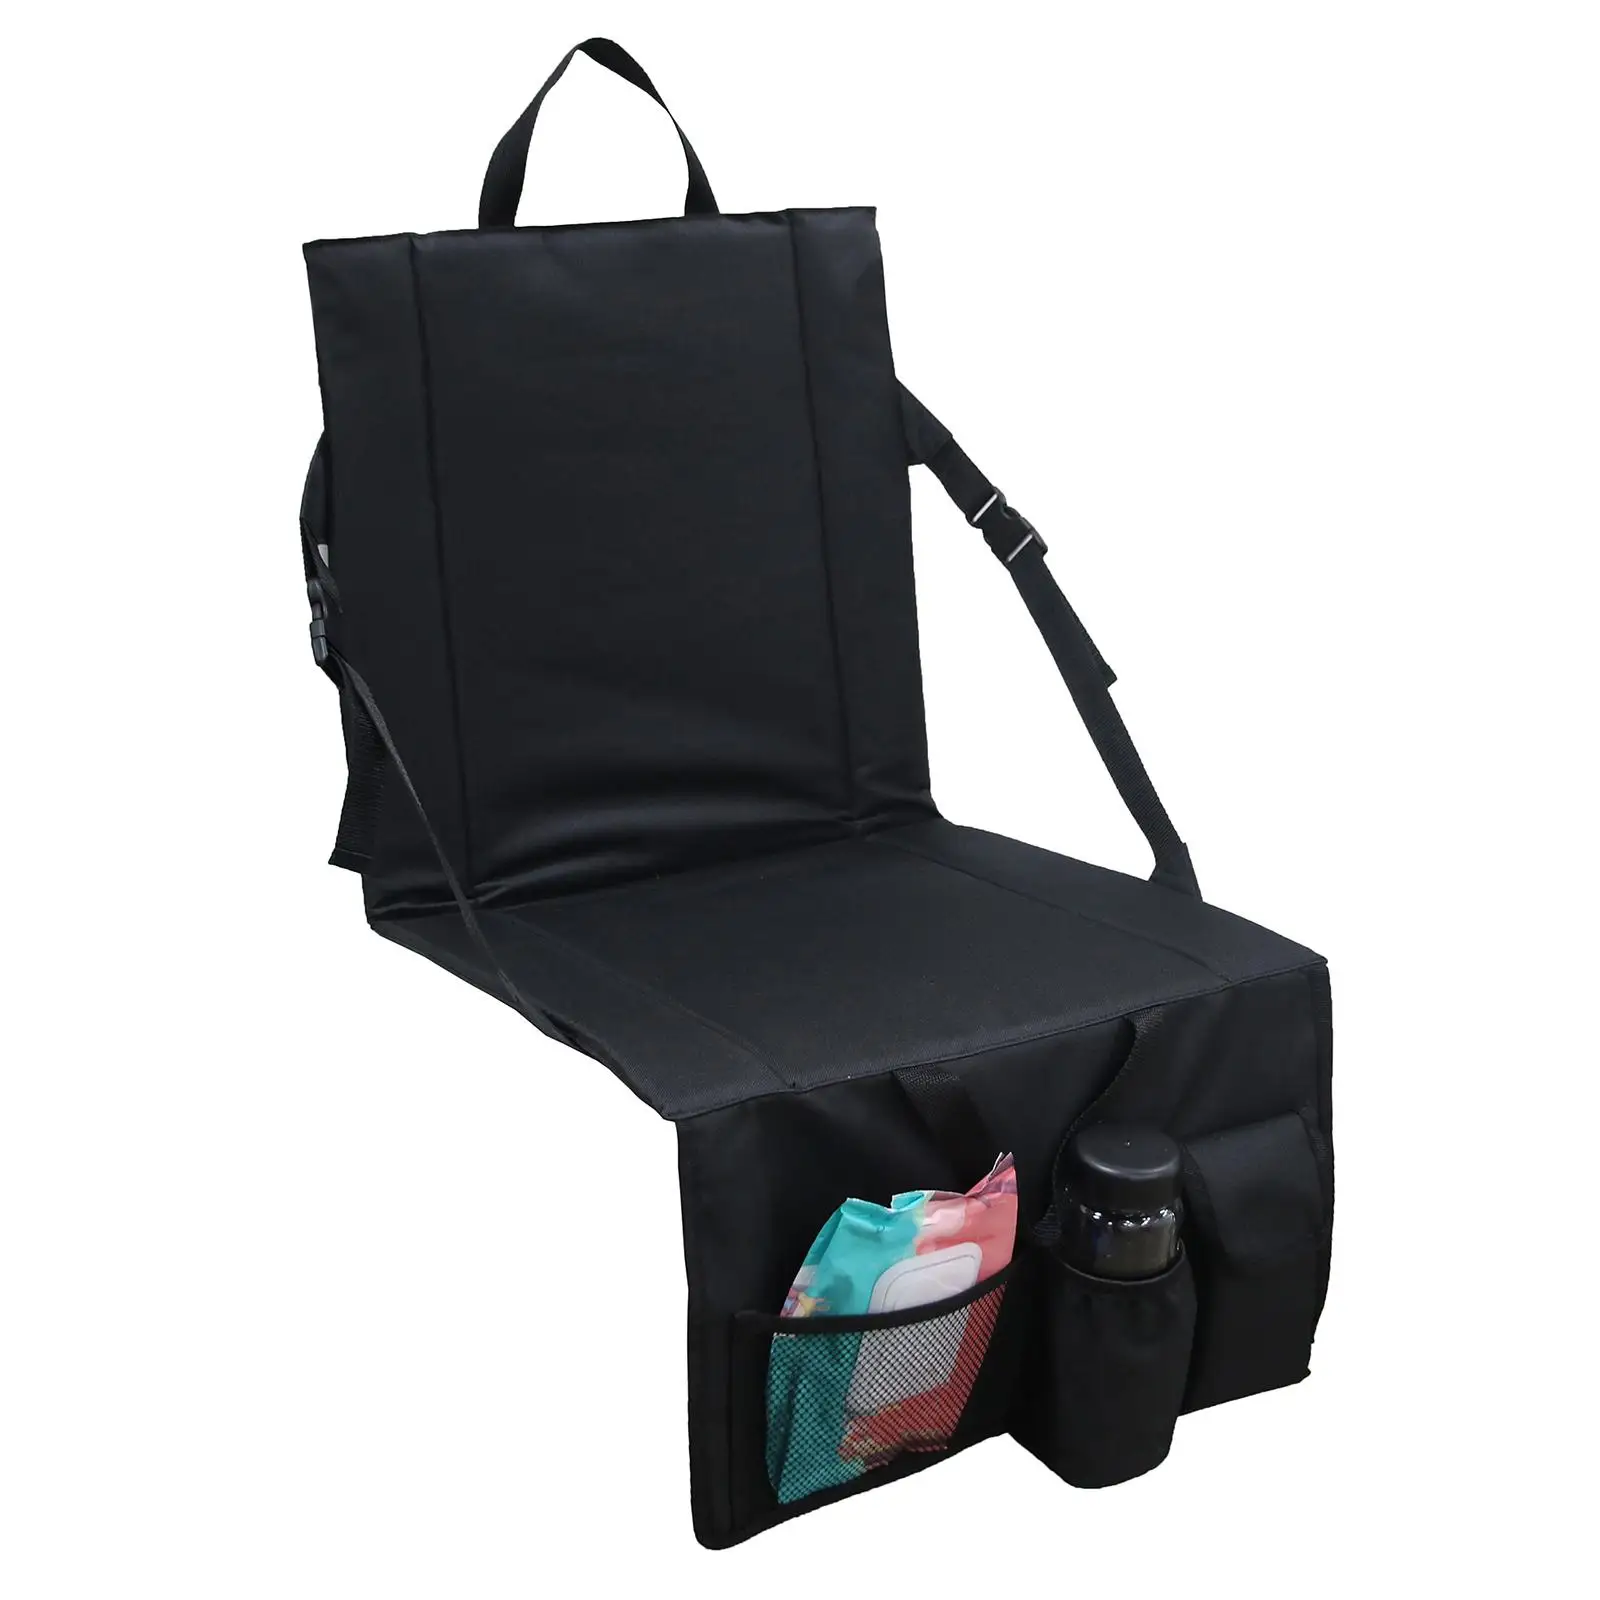 Foldable Stadium Chair with Pocket Padded Cushion Sit Mat Wide Lightweight Oxford Cloth Camping Trekking Outdoor Travel